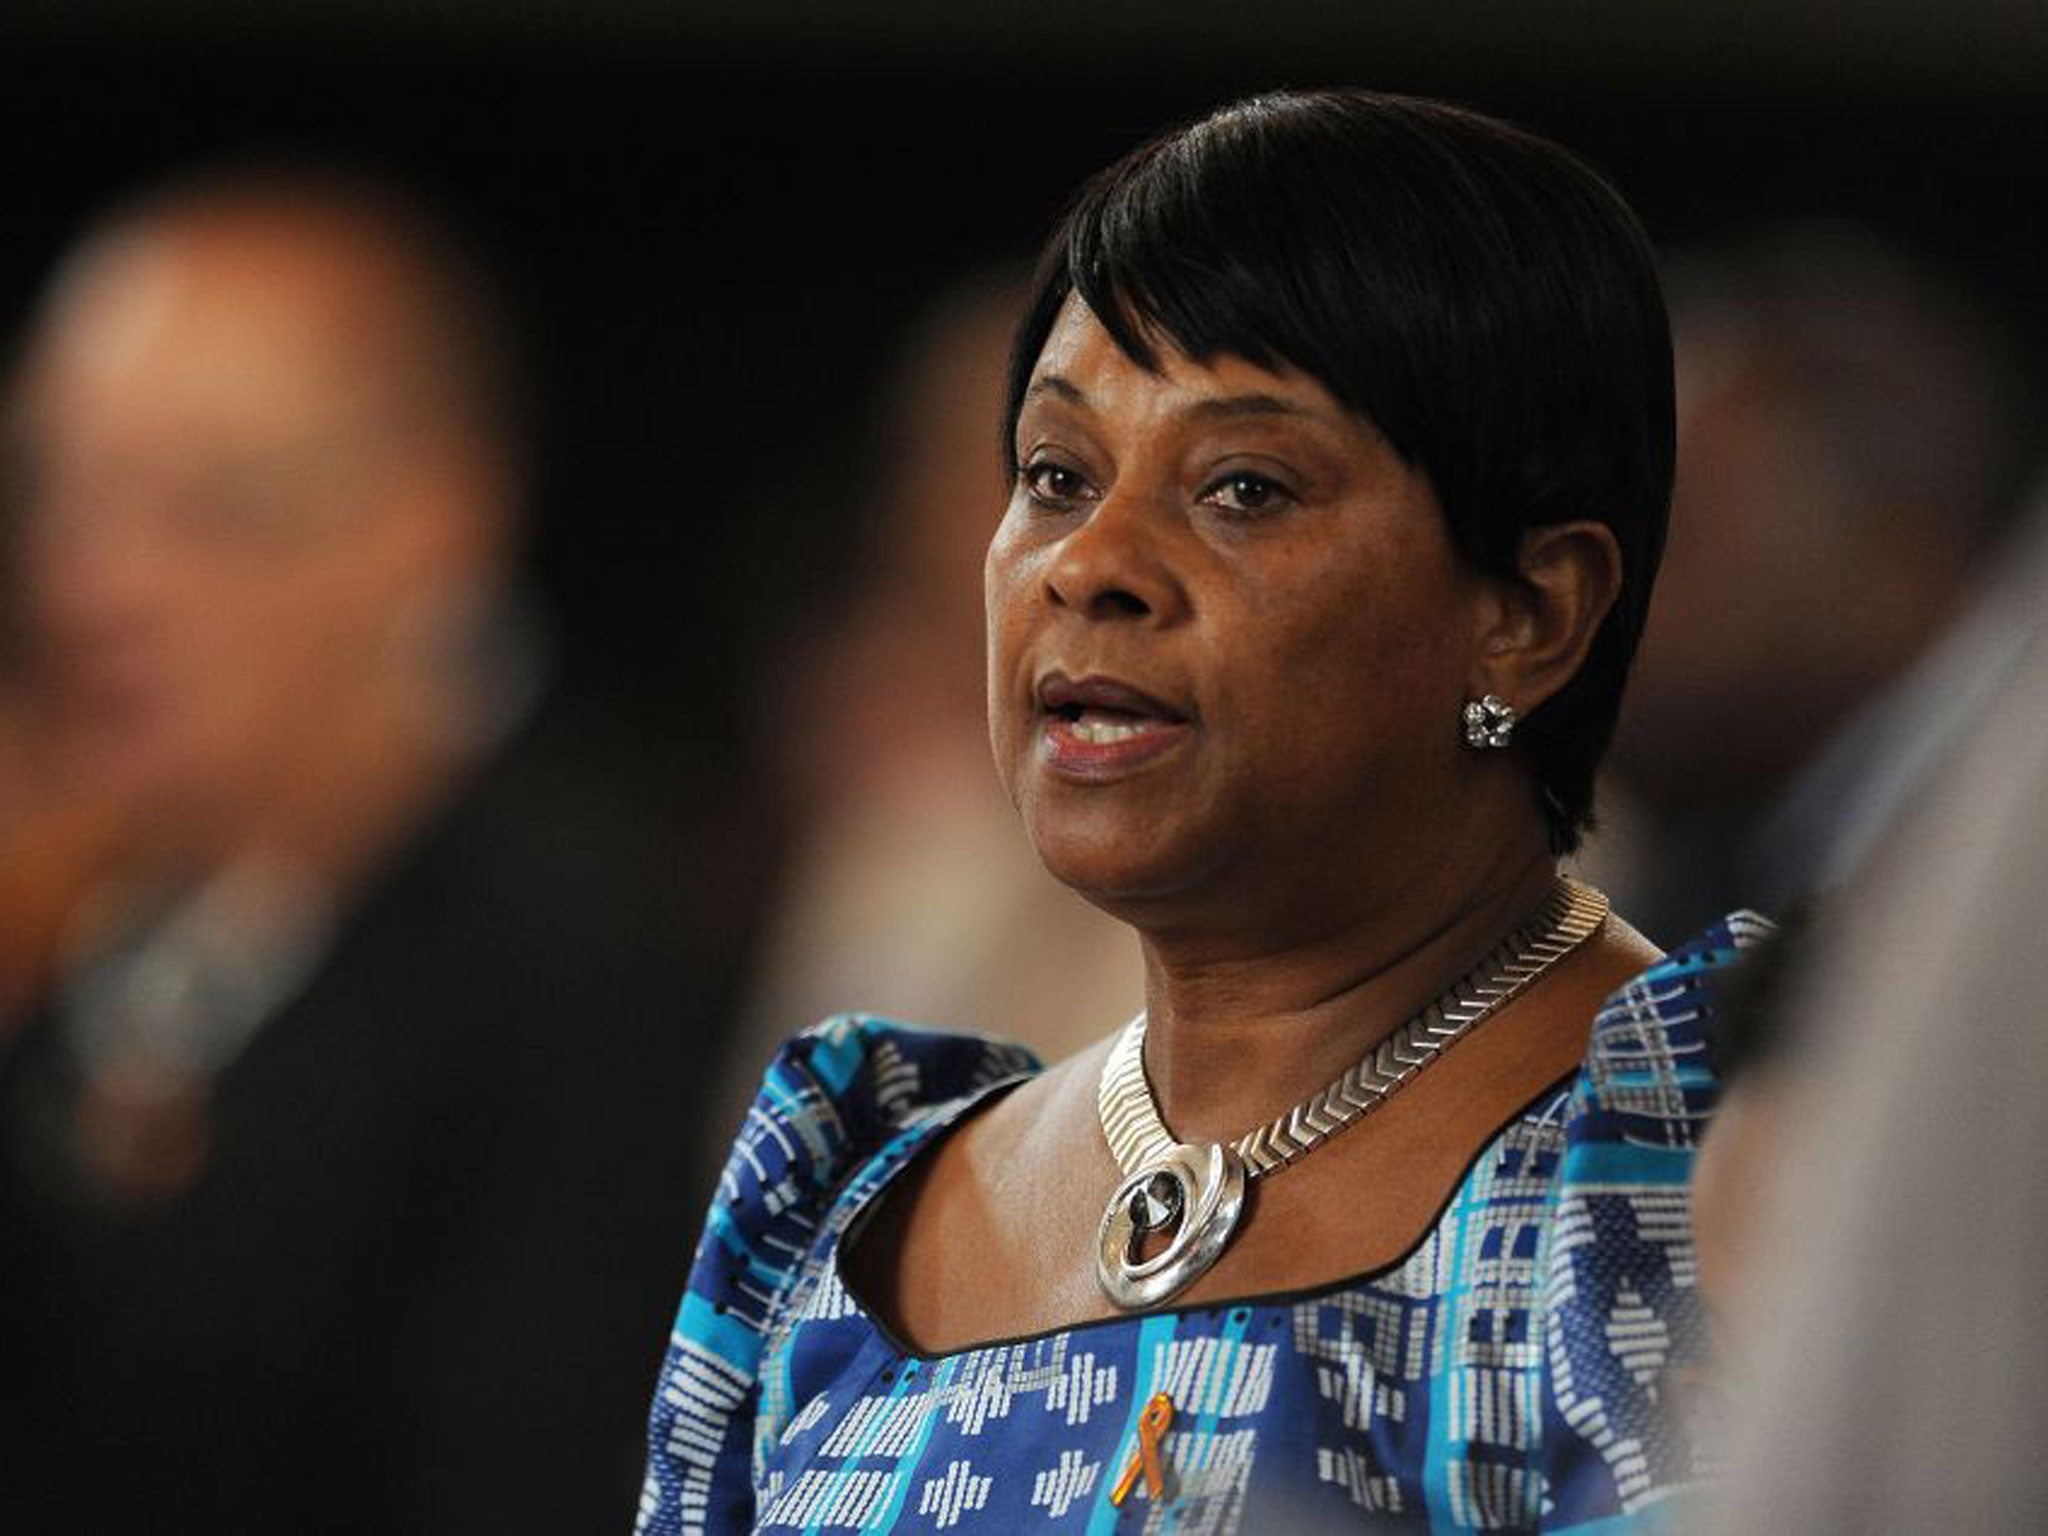 The immigration raids have angered Doreen Lawrence